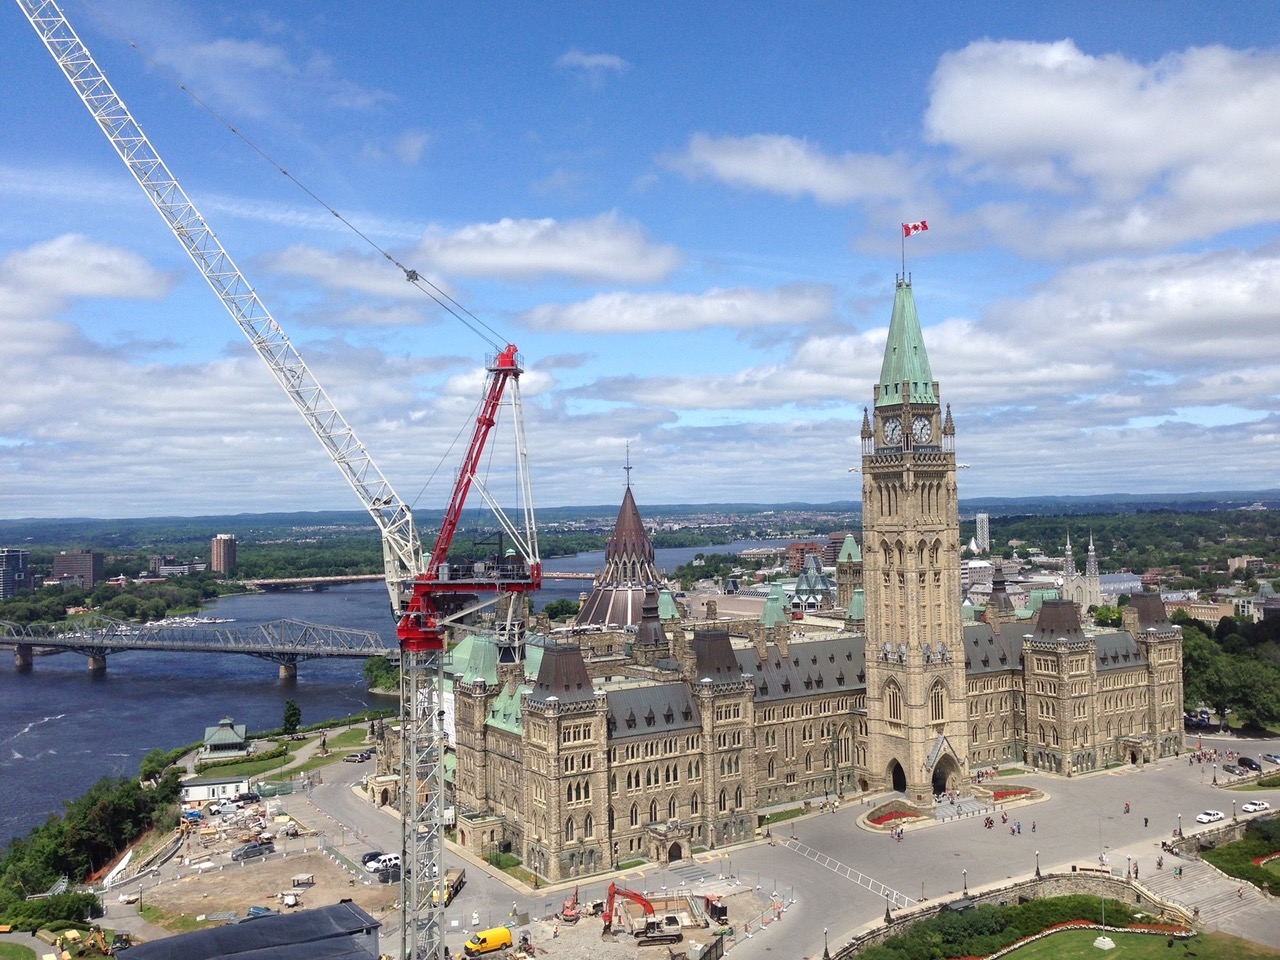 Local 793's Moe Lepage’s photo of Parliament Hill in Ottawa won the Landscape category.
